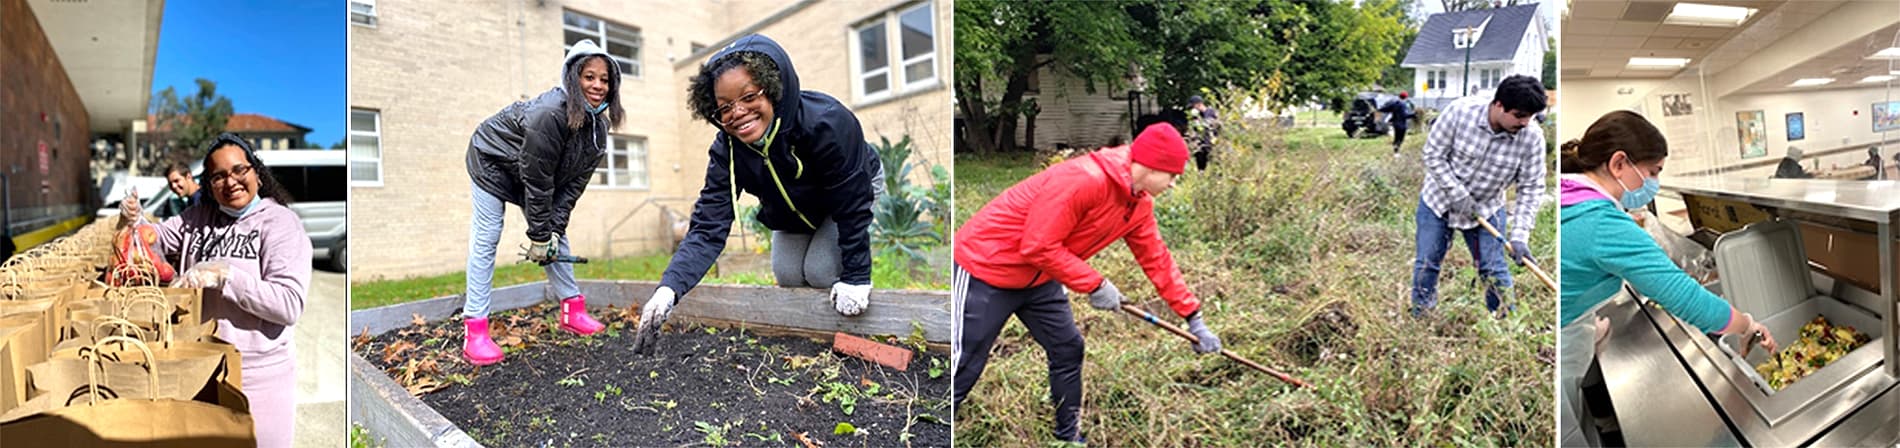 collage of students performing service in Detroit. From left to right, photo one is students bagging groceries. Photo two is students planting in a community garden. Photo three contains two students fixing up a lawn, and photo four contains a student serving meals at a soup kitchen.